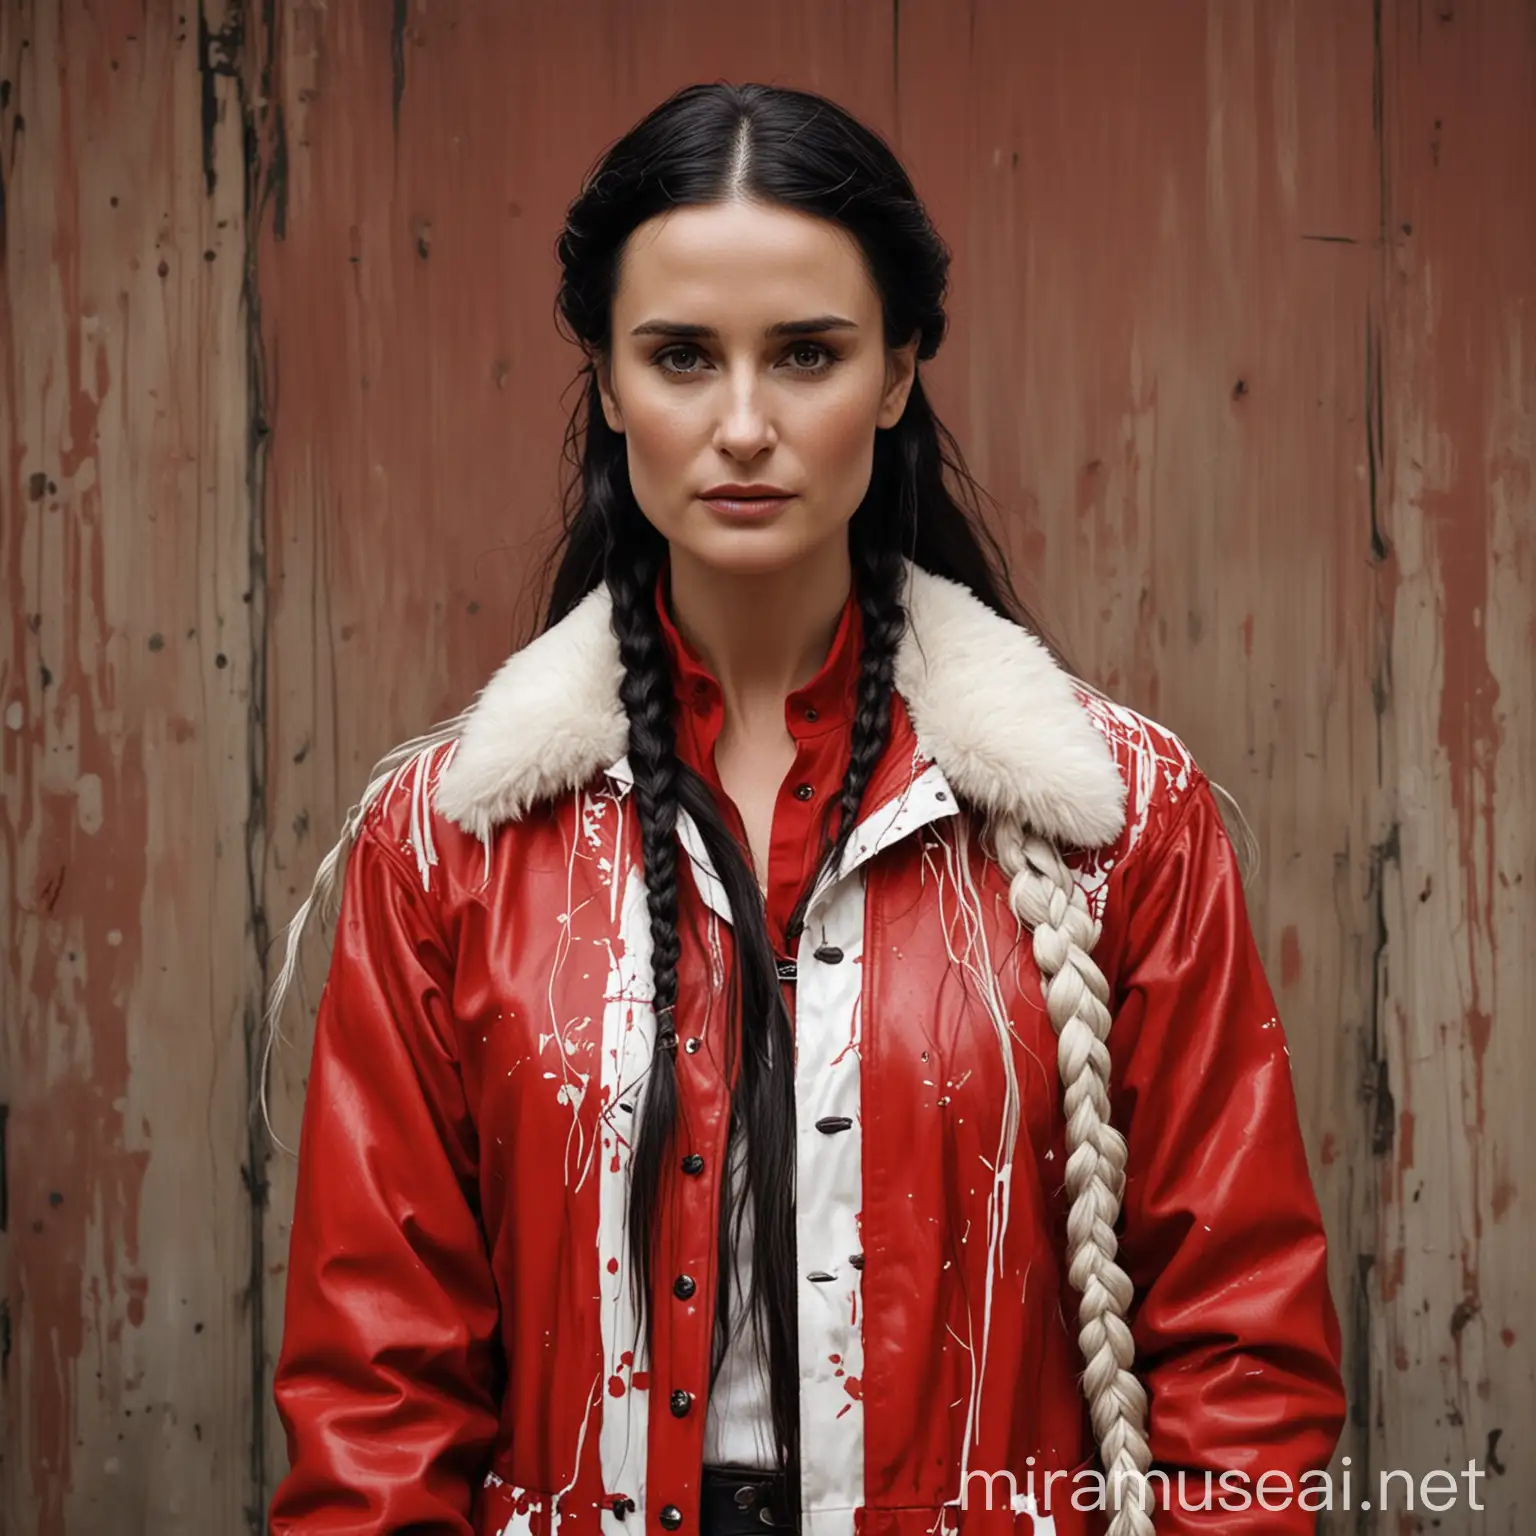 Demi Moore, 22 years old,with long braid hair wearing a red and white jacket, game of thrones, in the style of tomer hanuka, joram roukes, emotionally charged portraits, smilecore, rustic futurism, henrietta harris, darkly comedic, rough painting, children illustration metal slug